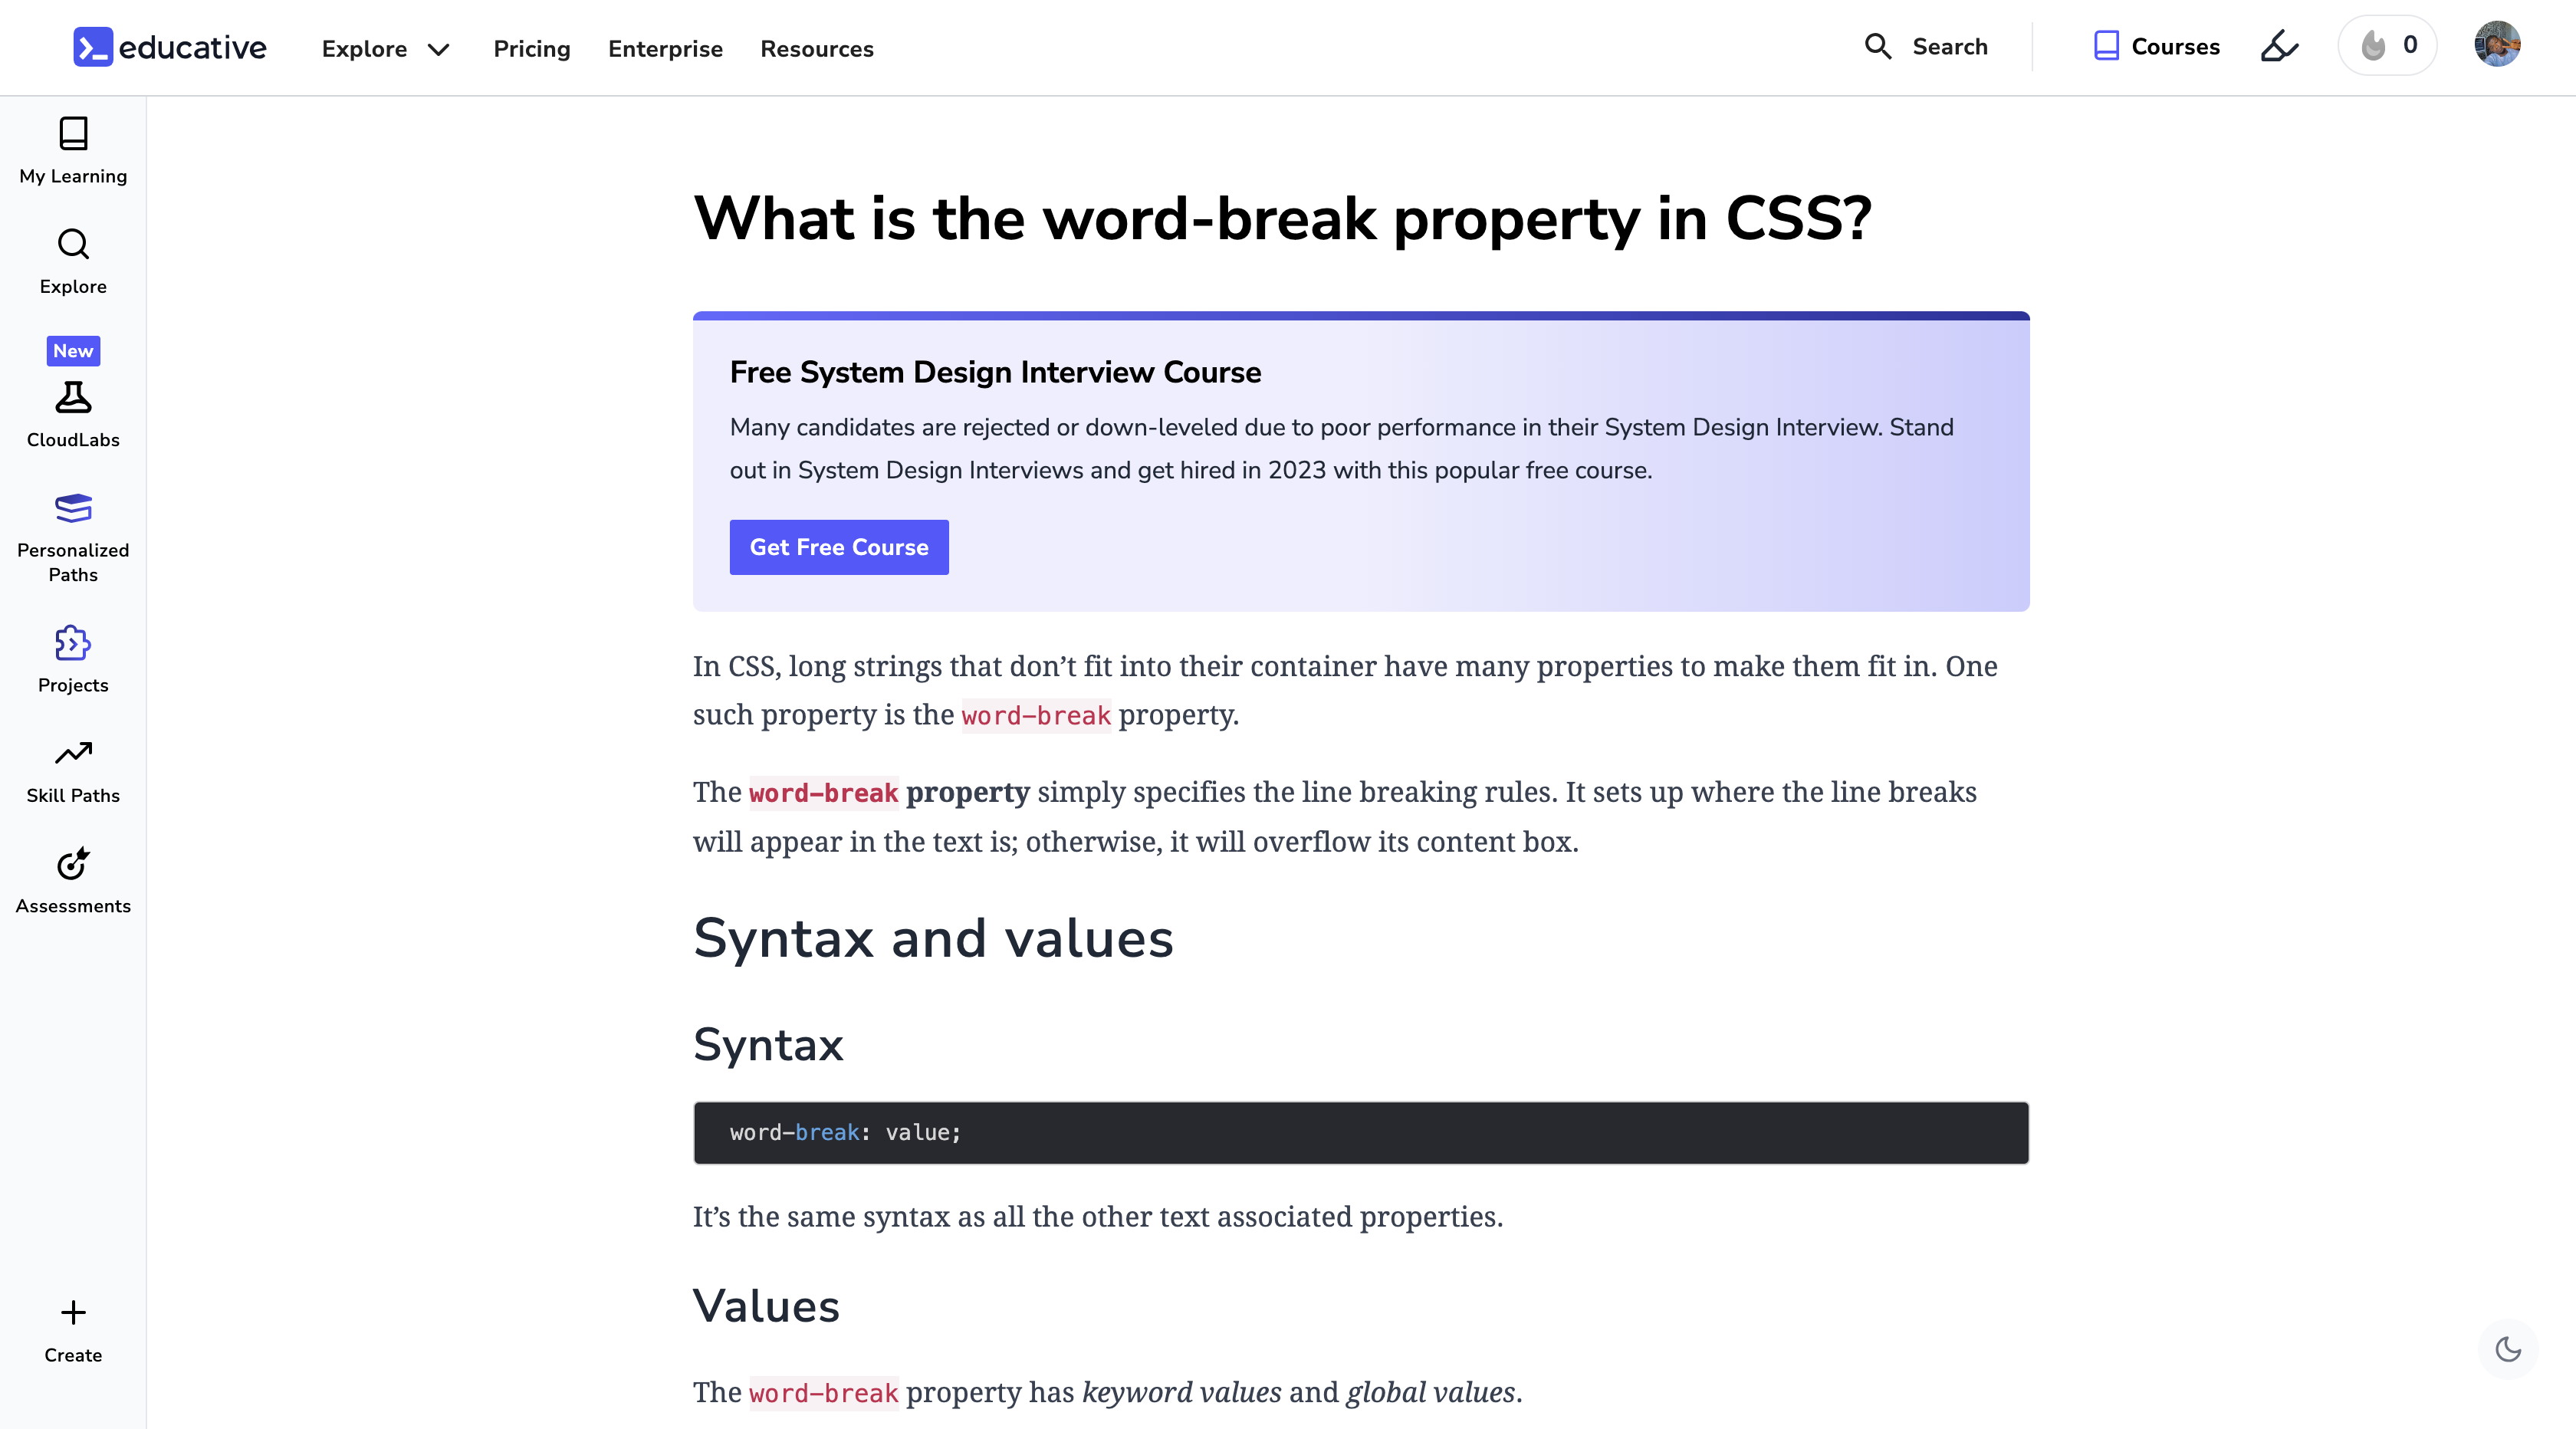 What is the word-break property in CSS?